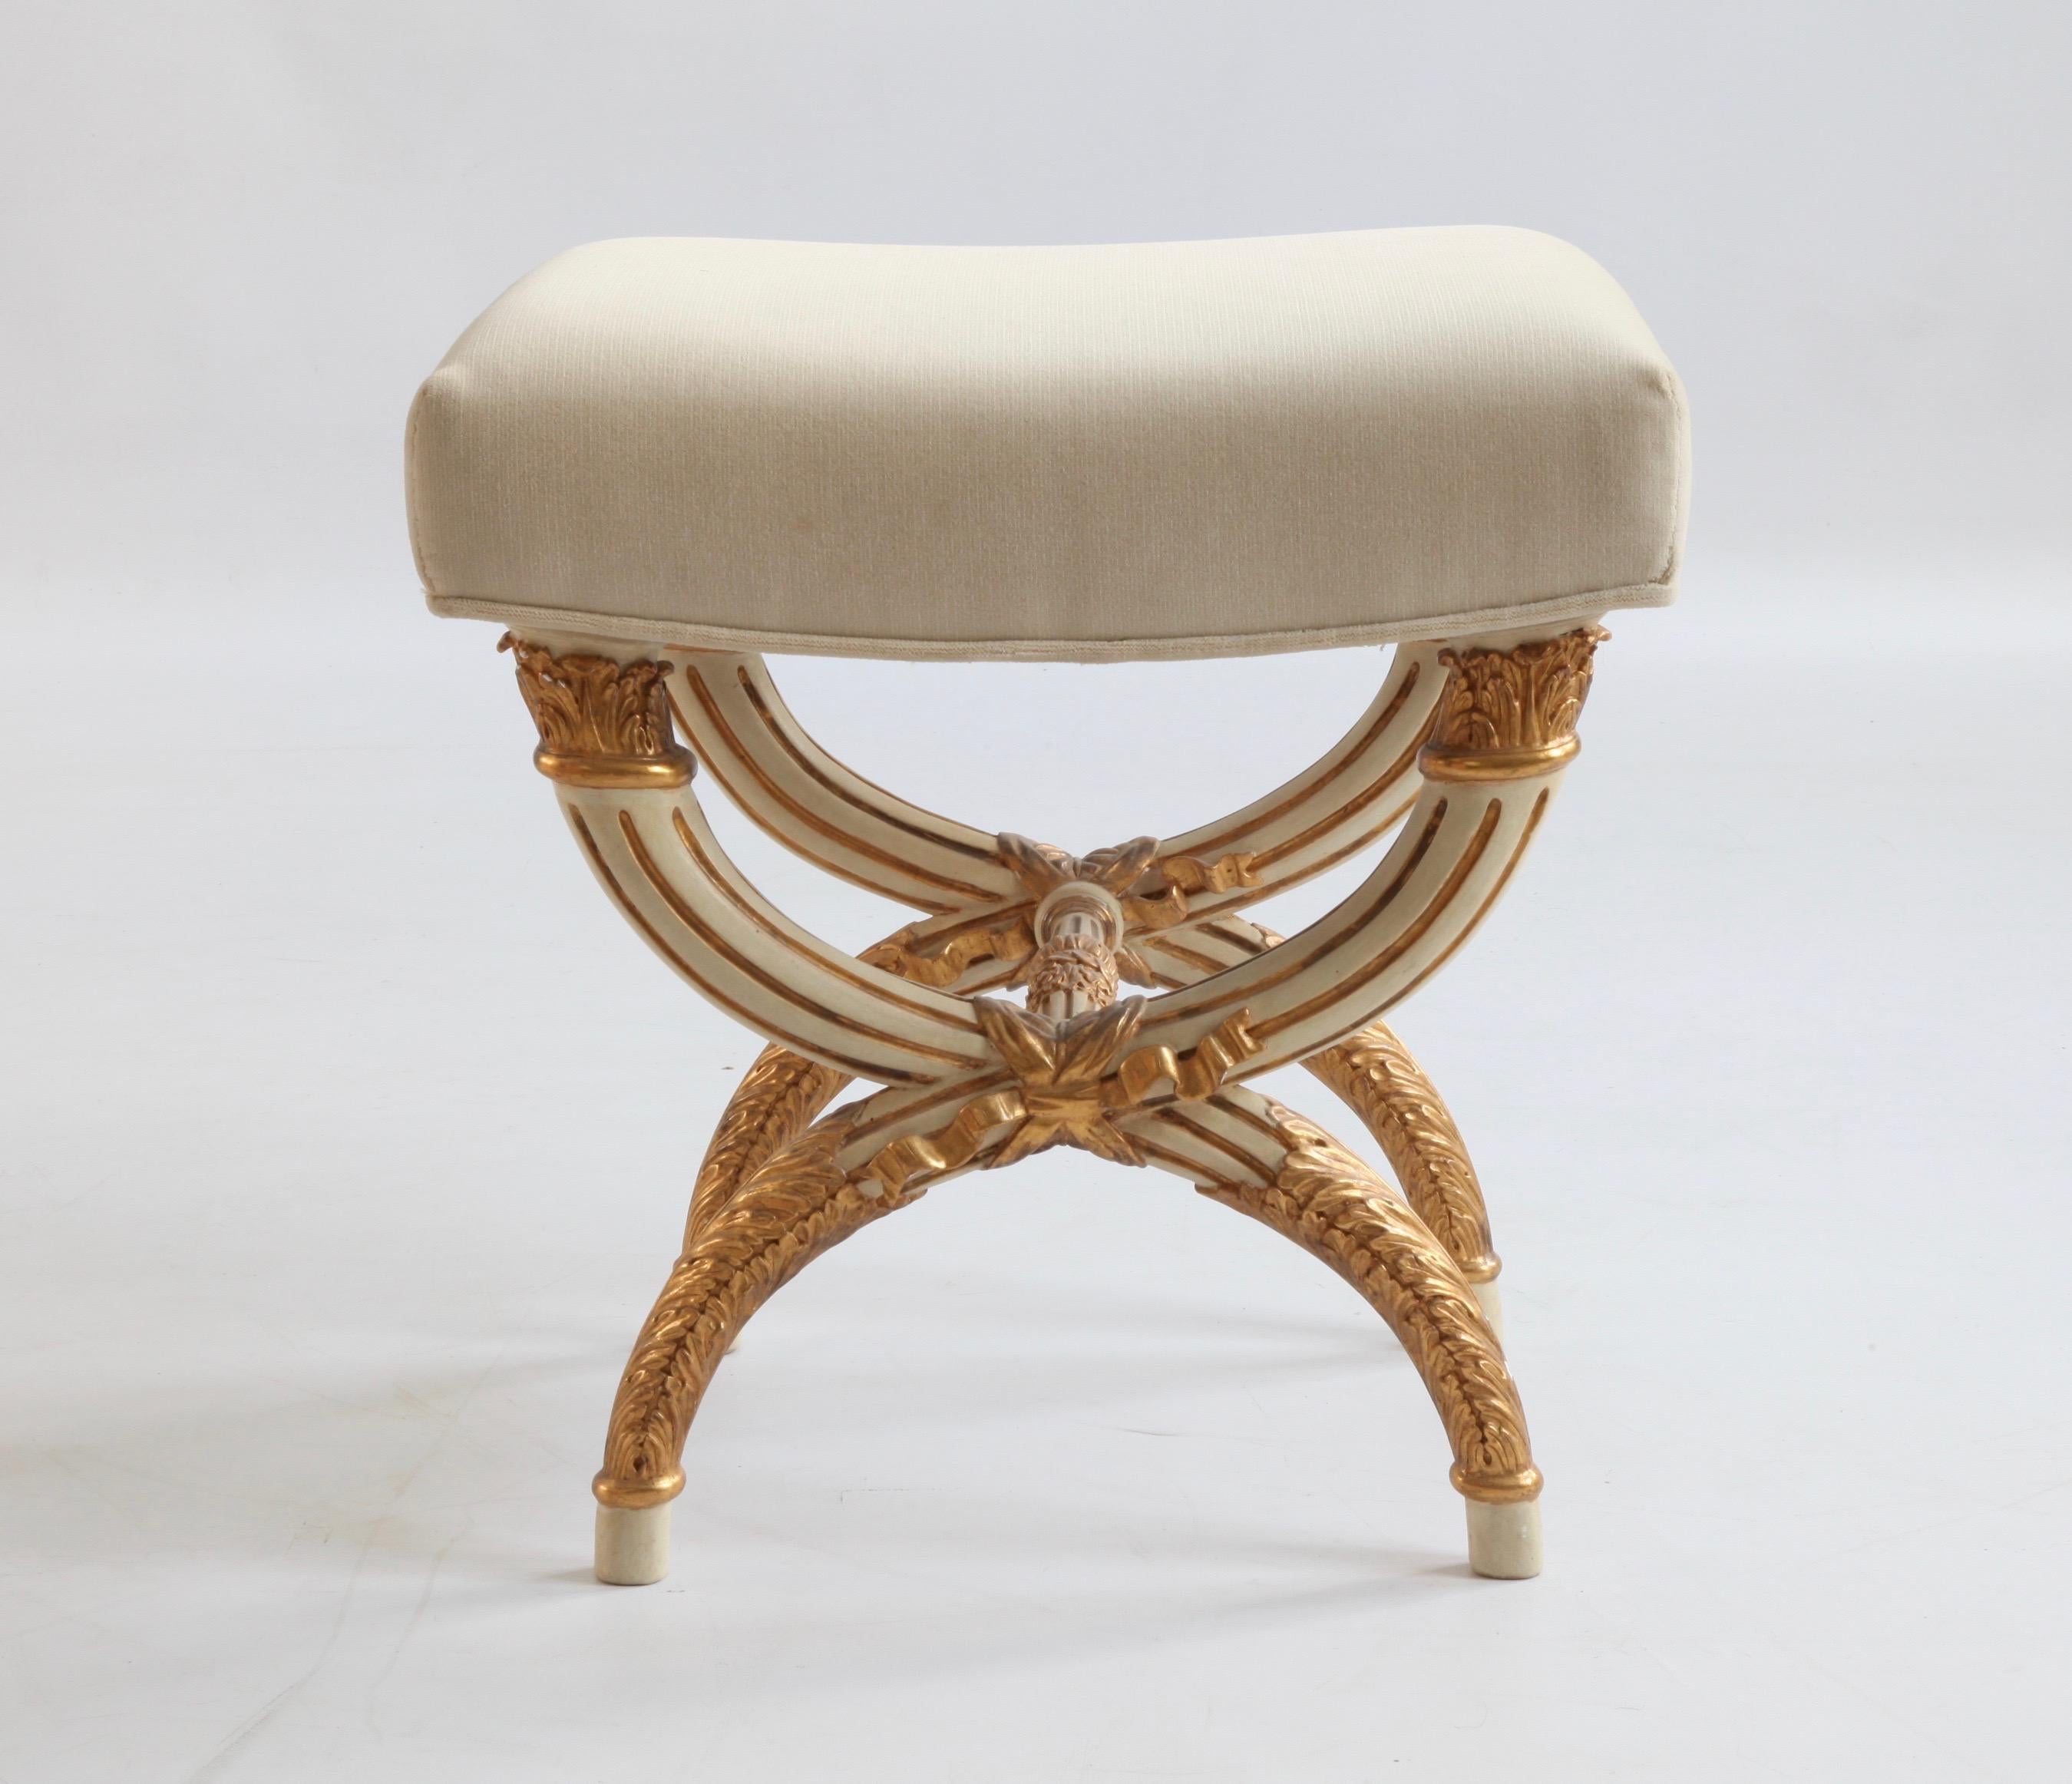 Louis XVI style stool X-shaped stool made by La Maison London.
Fine carving all around, upholstered in a warm grey velvet.